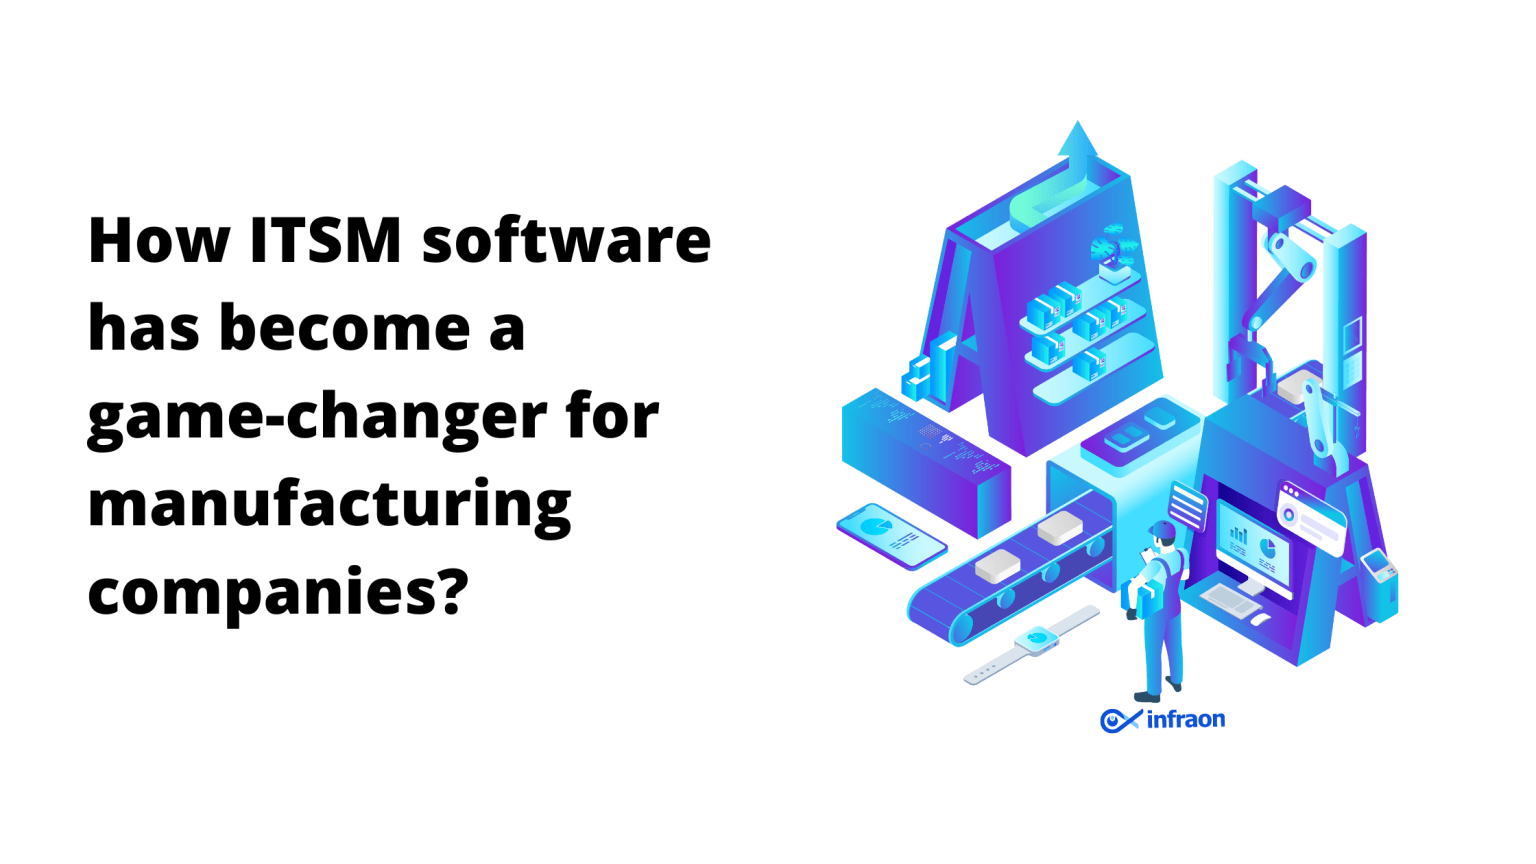 How ITSM Service Software has become a game-changer for manufacturing companies?